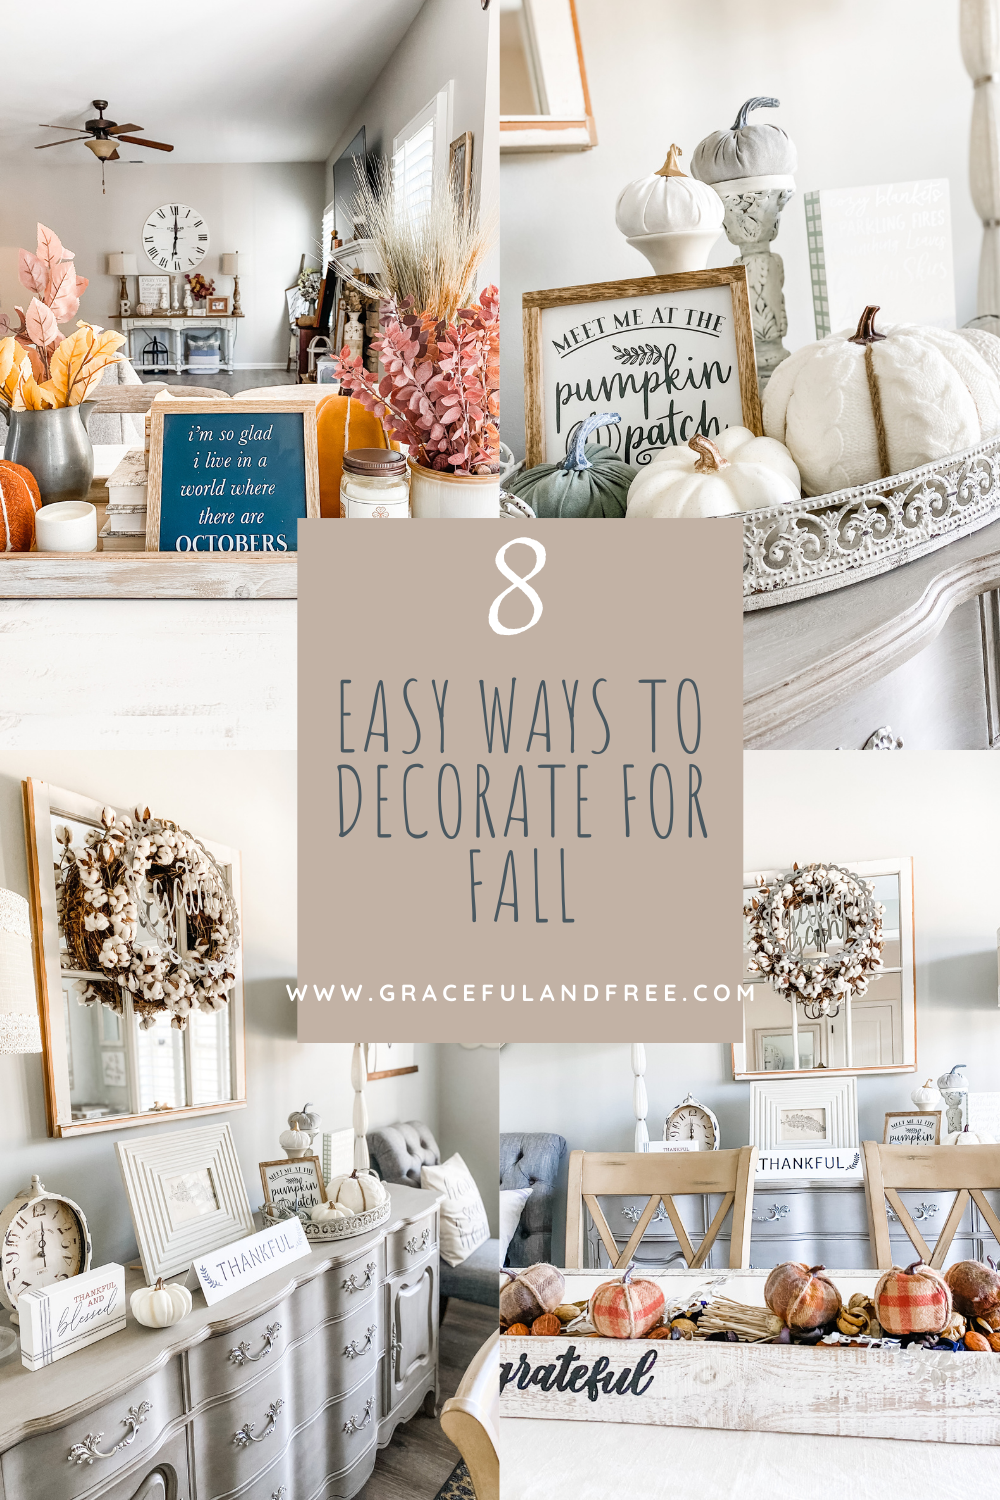 8 Easy Ways to Decorate for Fall